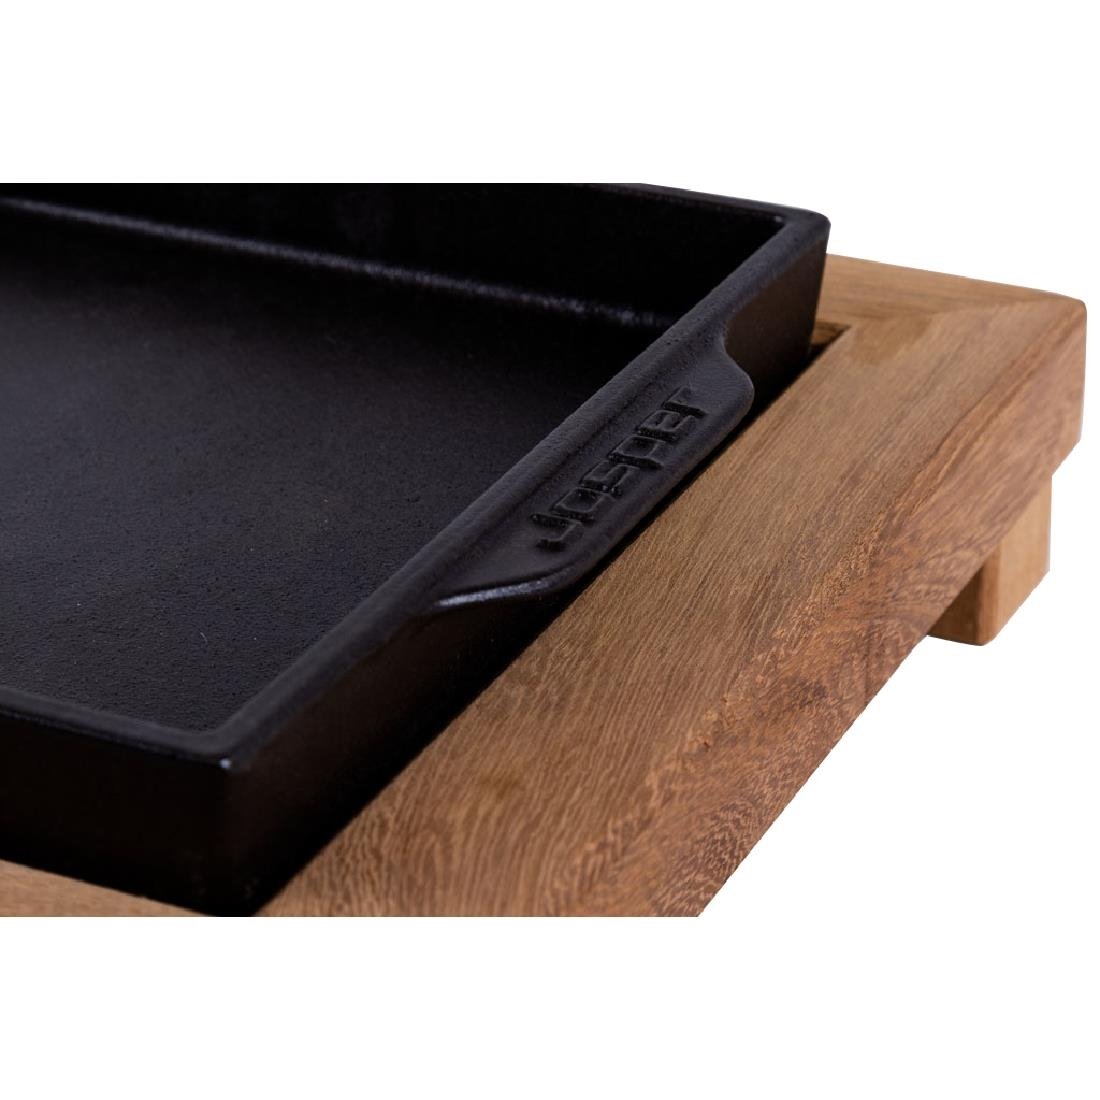 AT331 Josper Charcoal Oven Cast Iron Service Tray and Platter 250x150mm